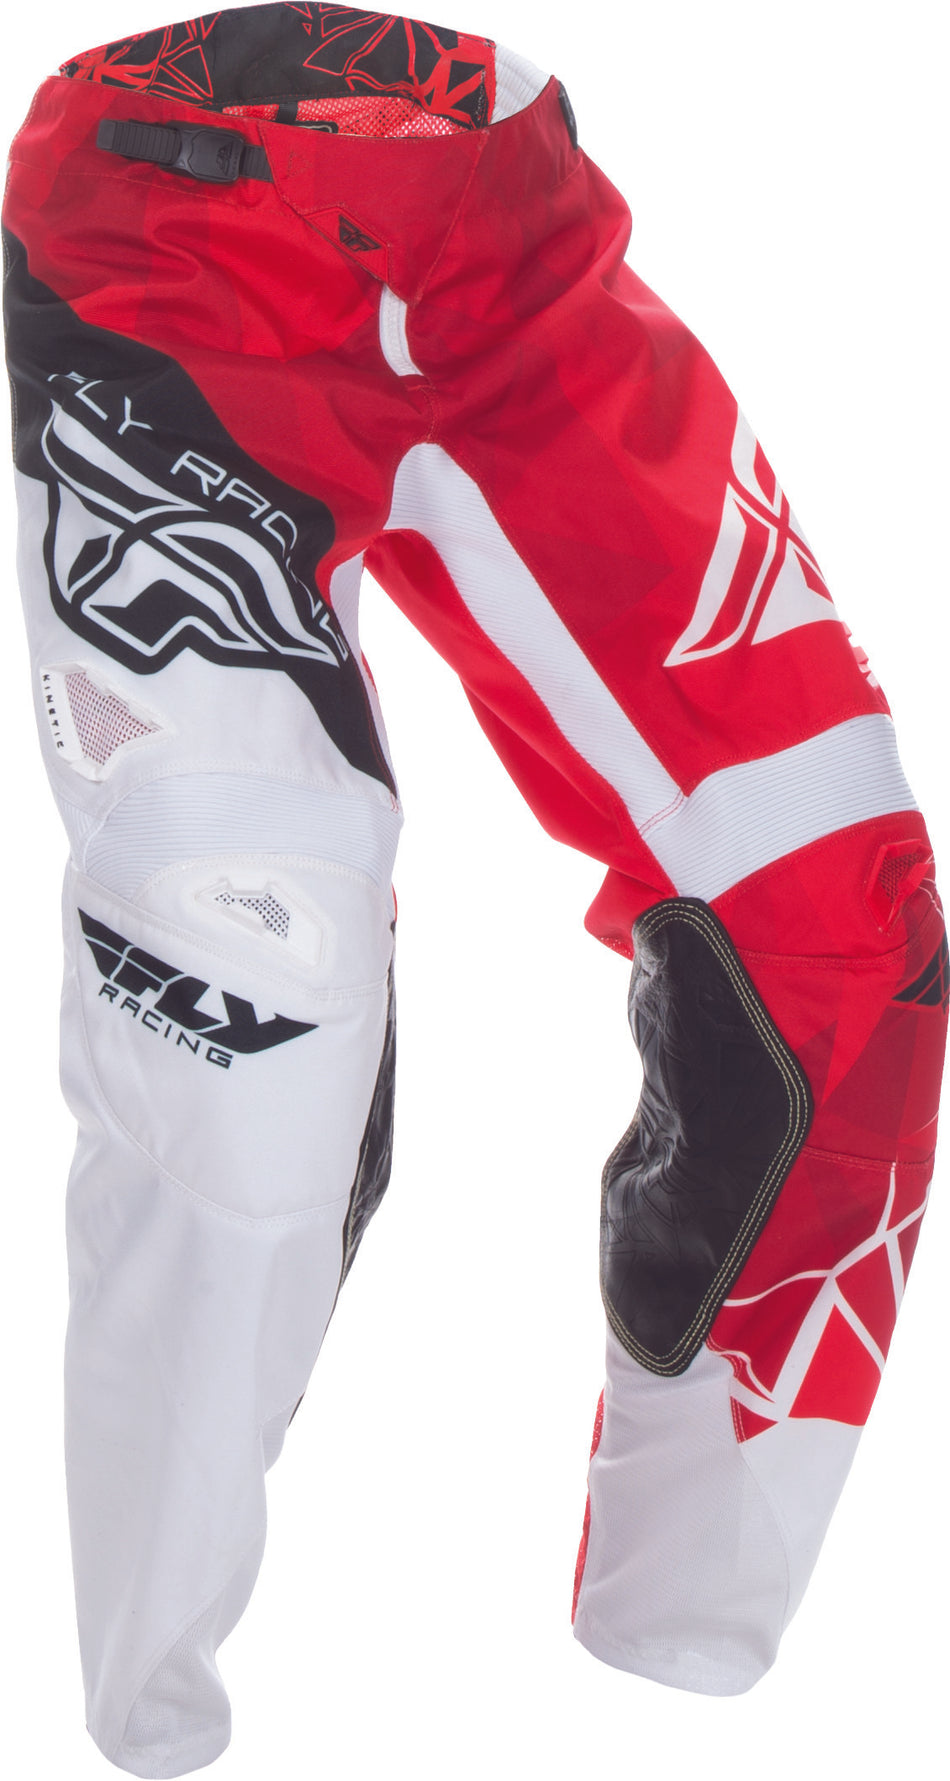 FLY RACING Kinetic Crux Pant Red/White Sz 22 370-53222